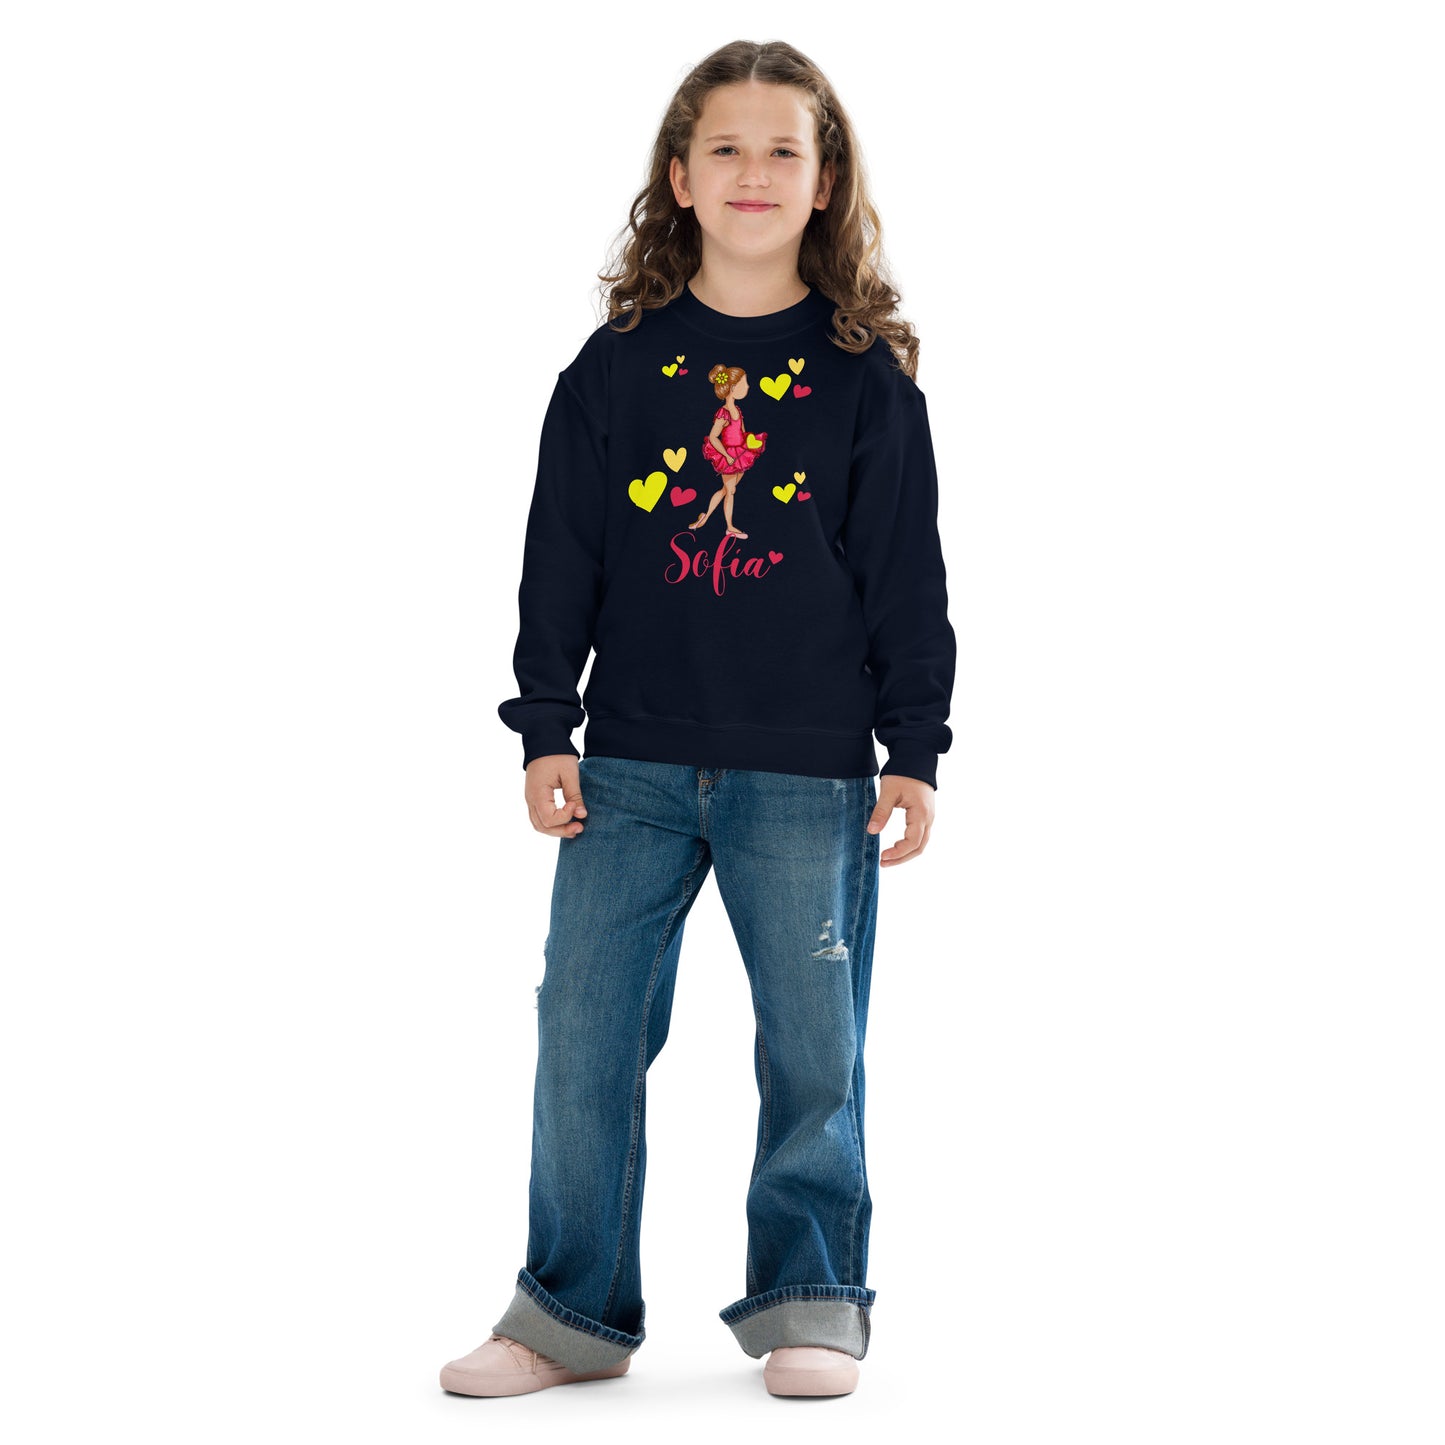 a young girl wearing a black sweatshirt with hearts and a name on it